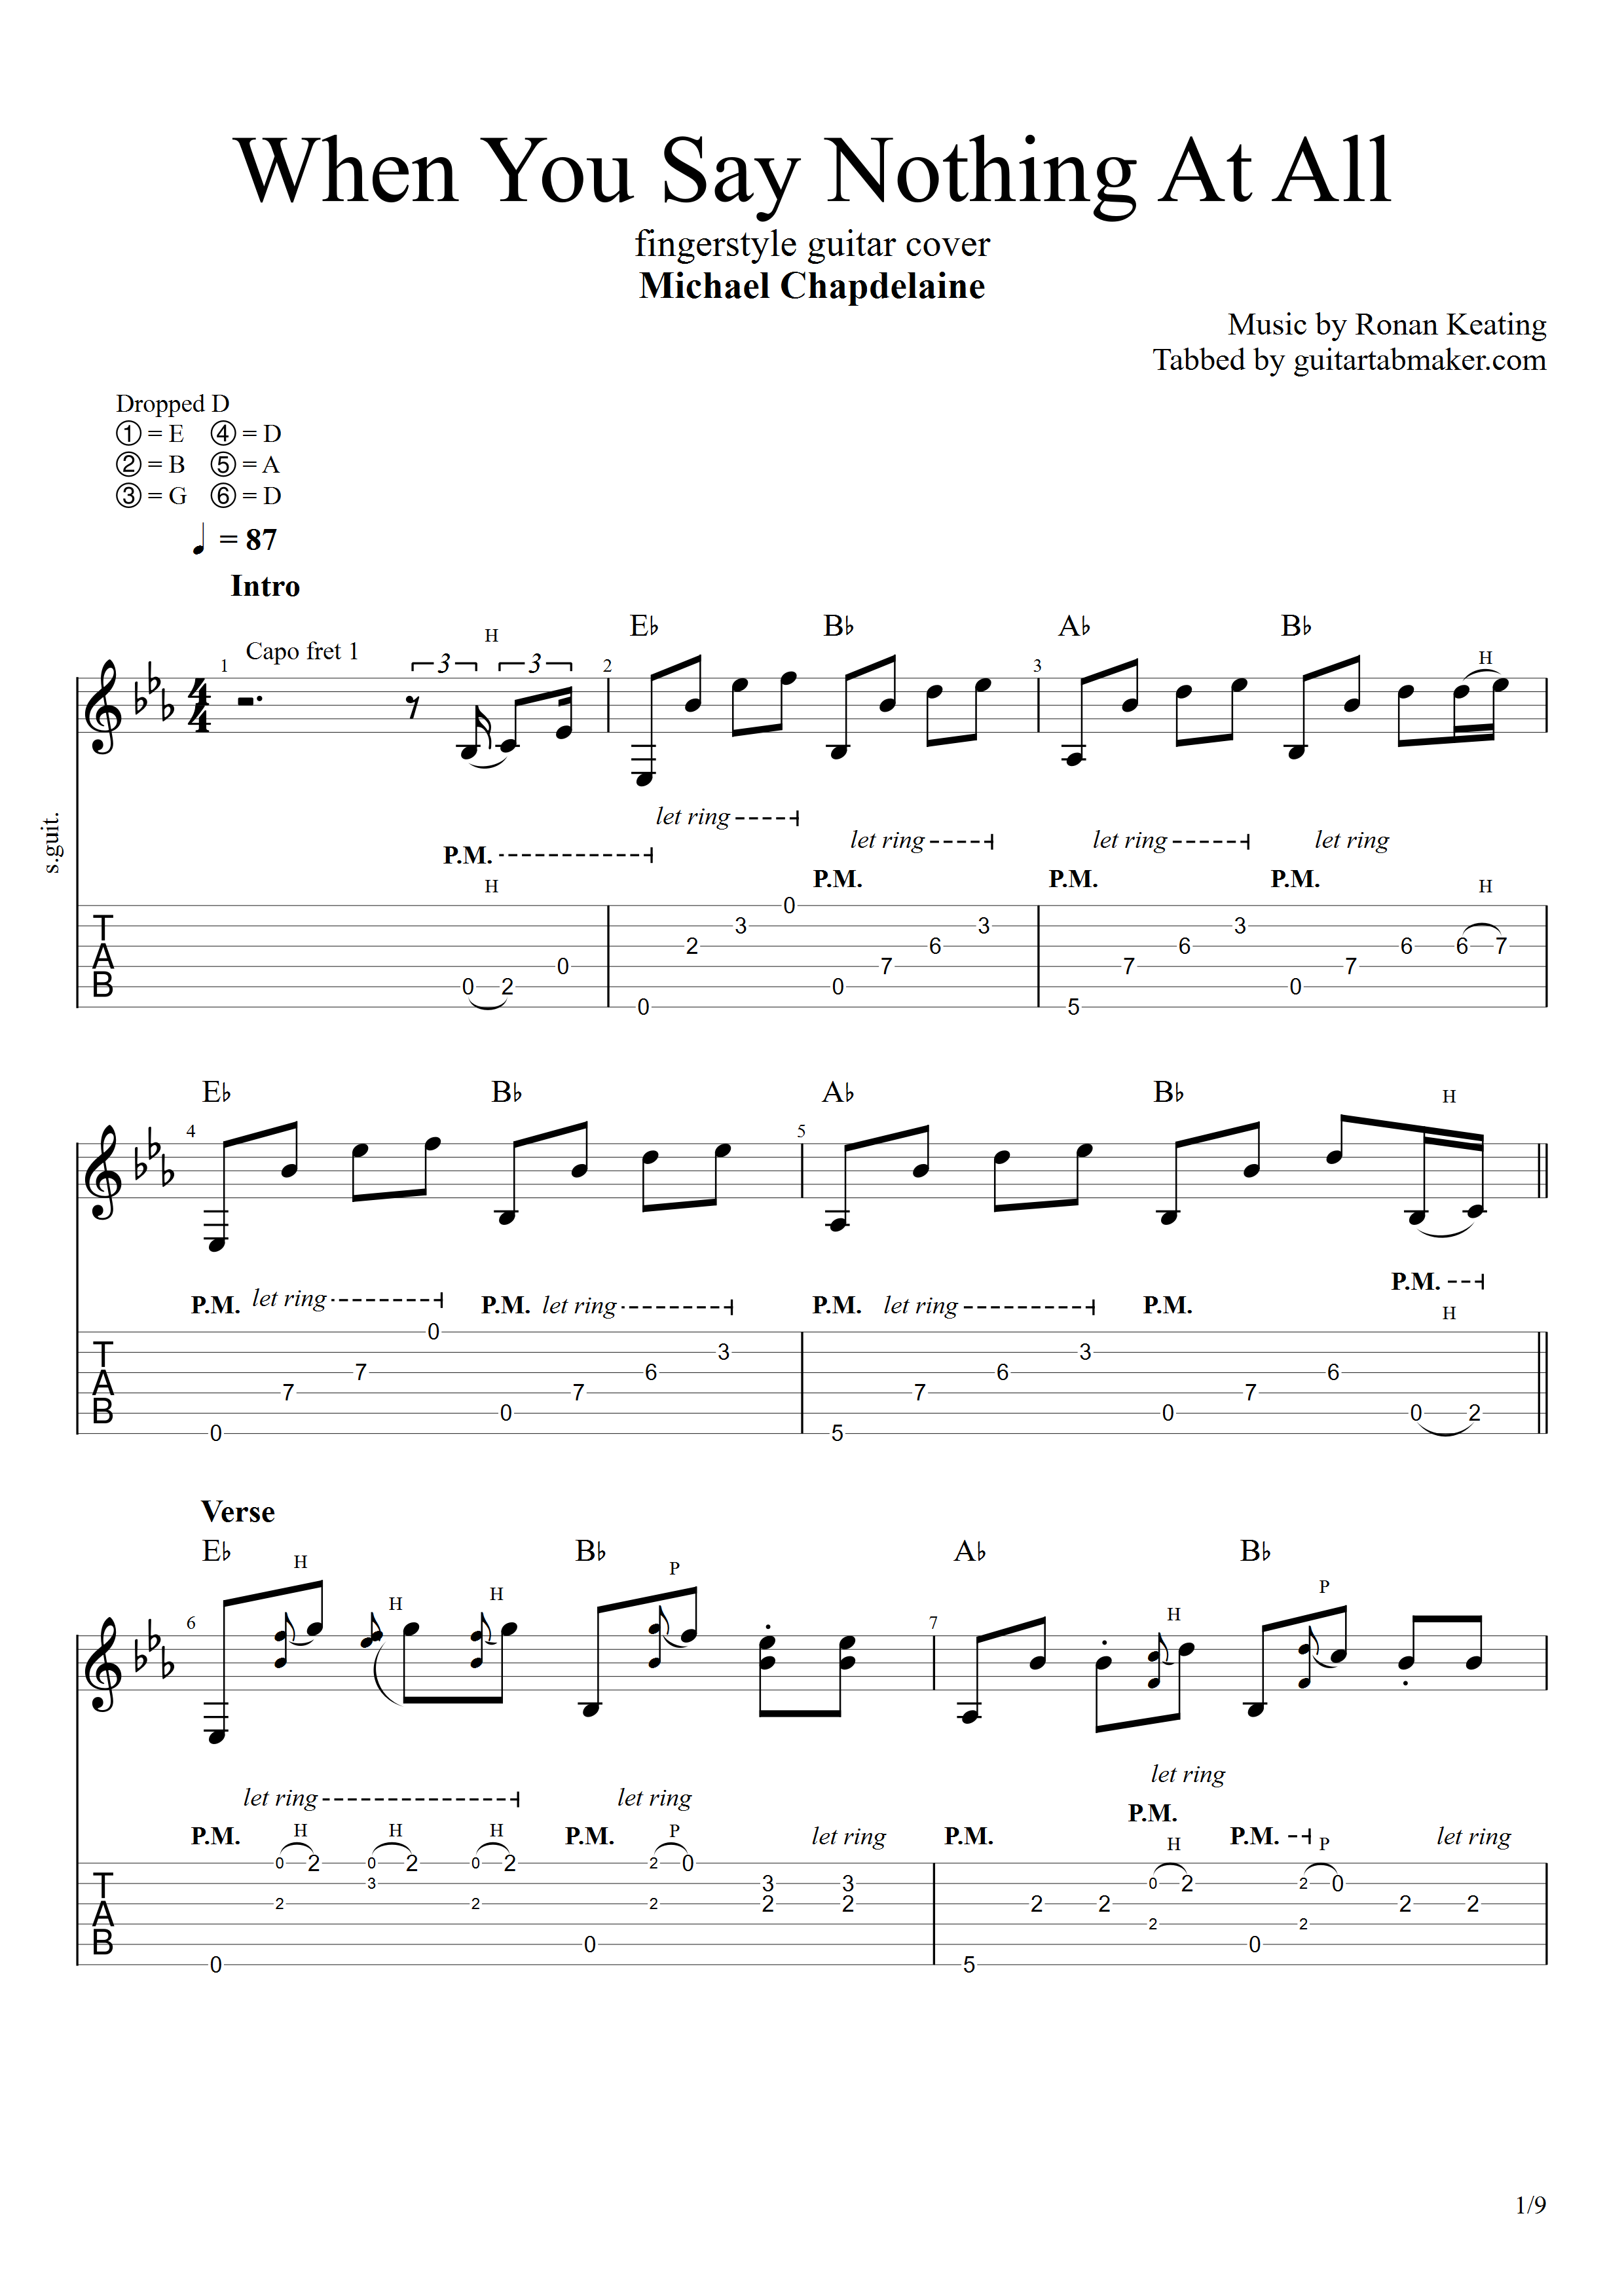 When You Say Nothing At All fingerstyle guitar TAB